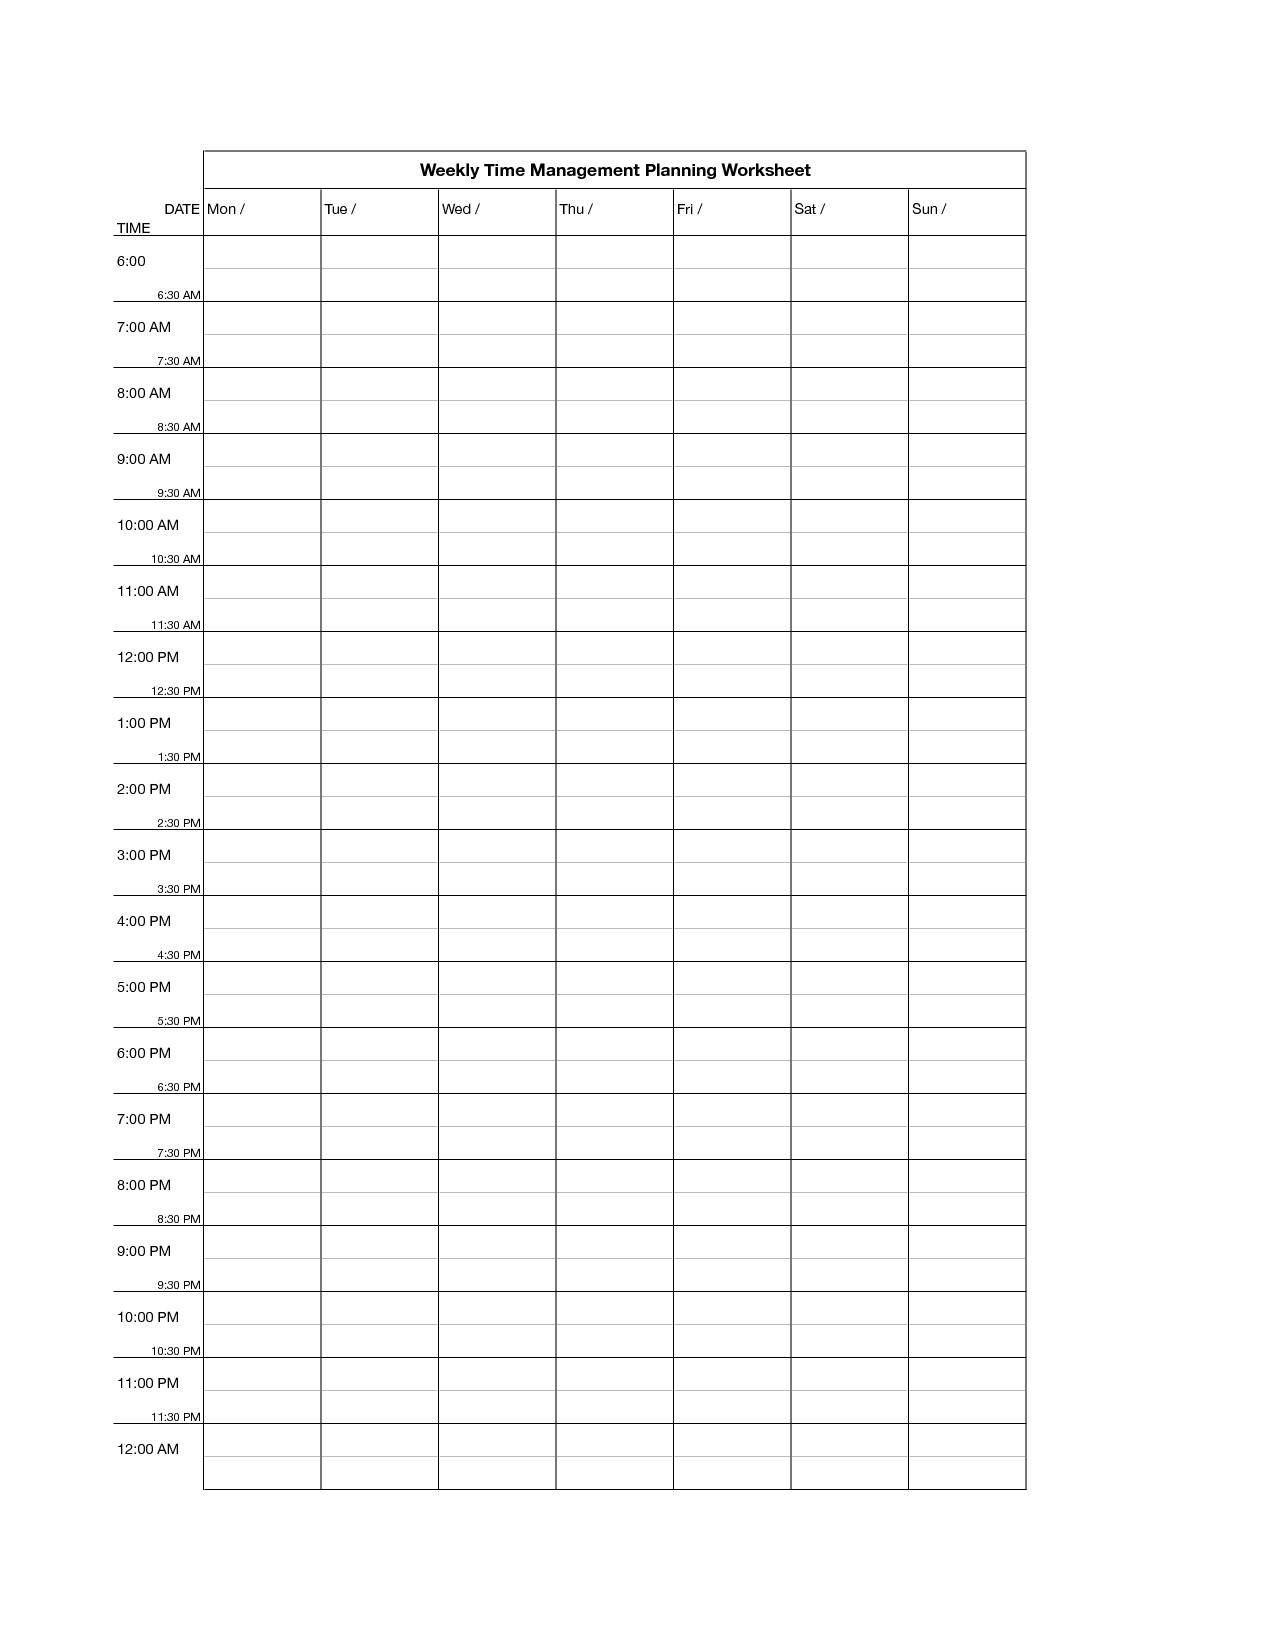 printable-weekly-time-management-template-printable-templates